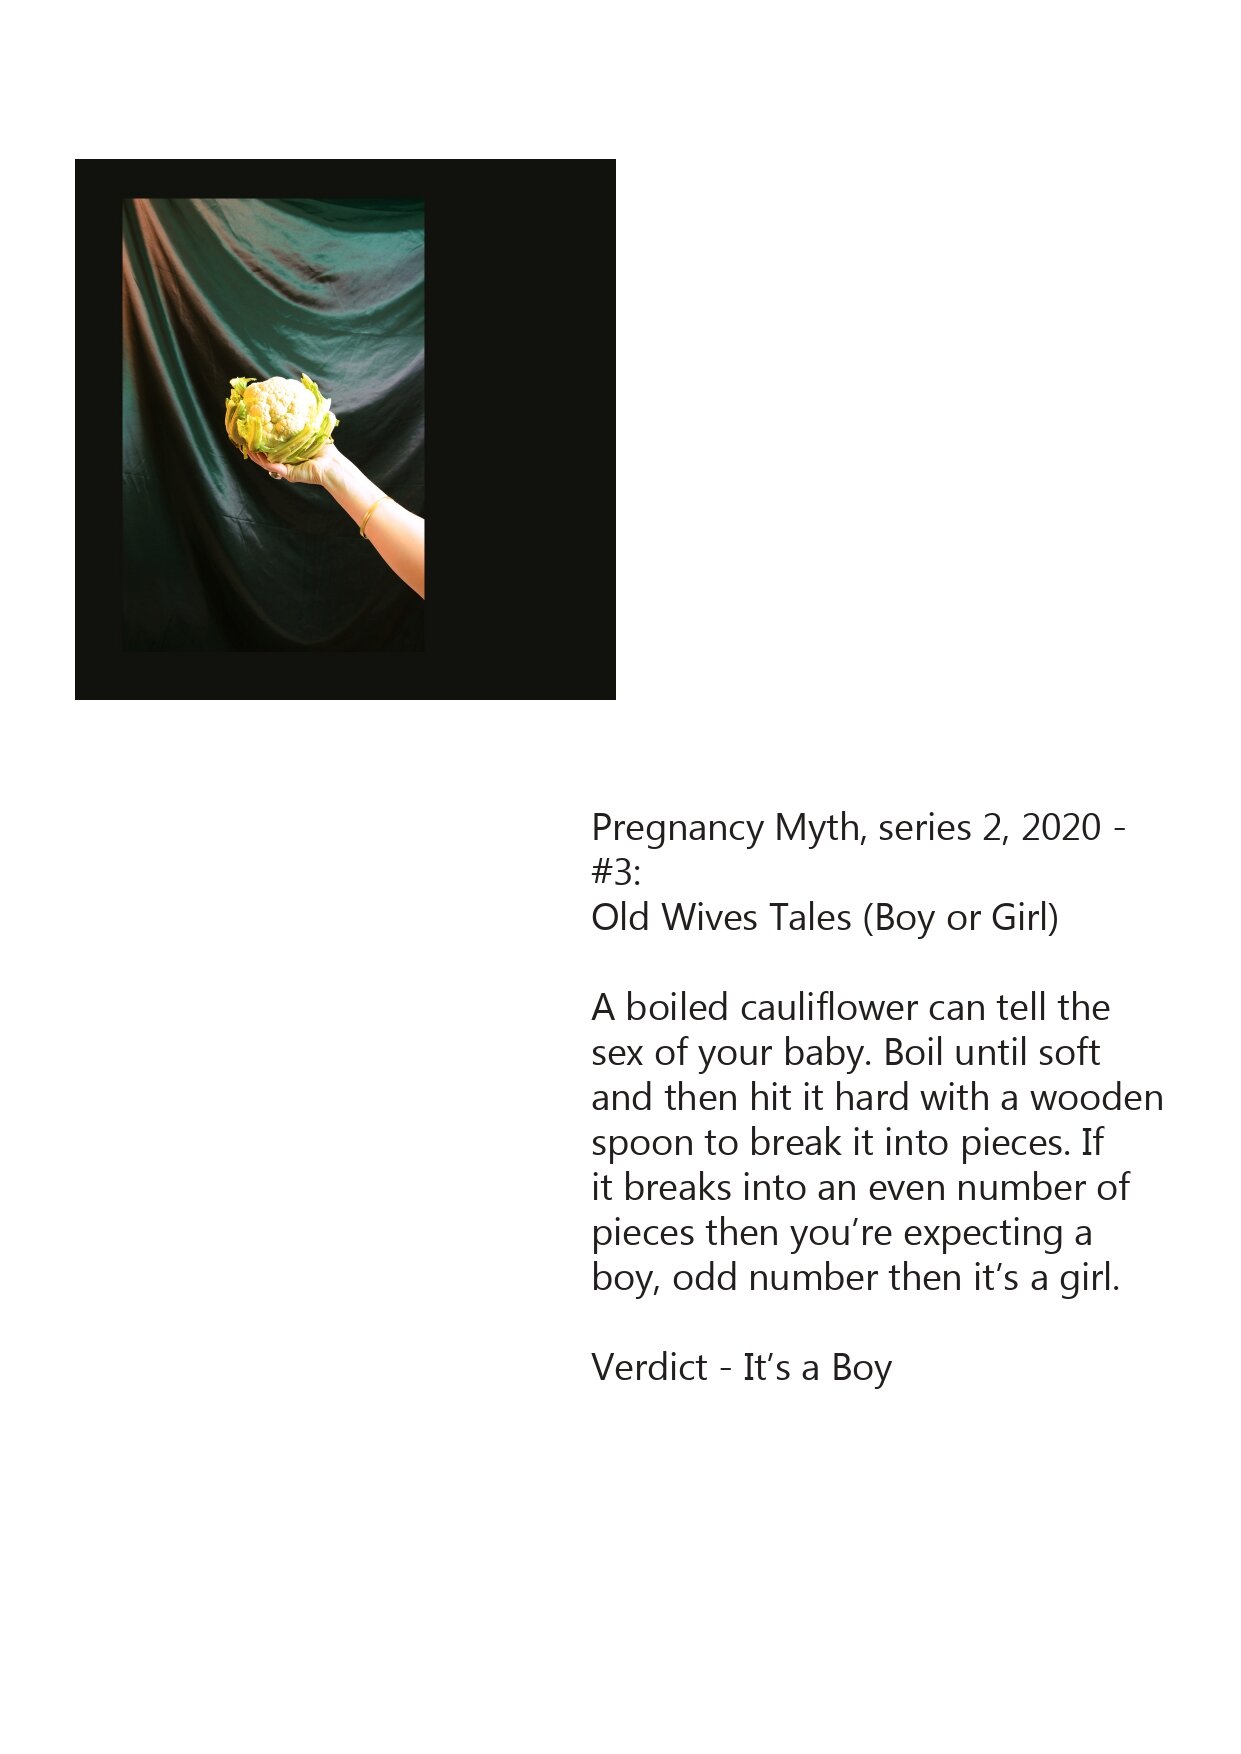 Pregnancy Myth, series 2 Old Wives Tales (Boy or Girl) — georgie white winter picture